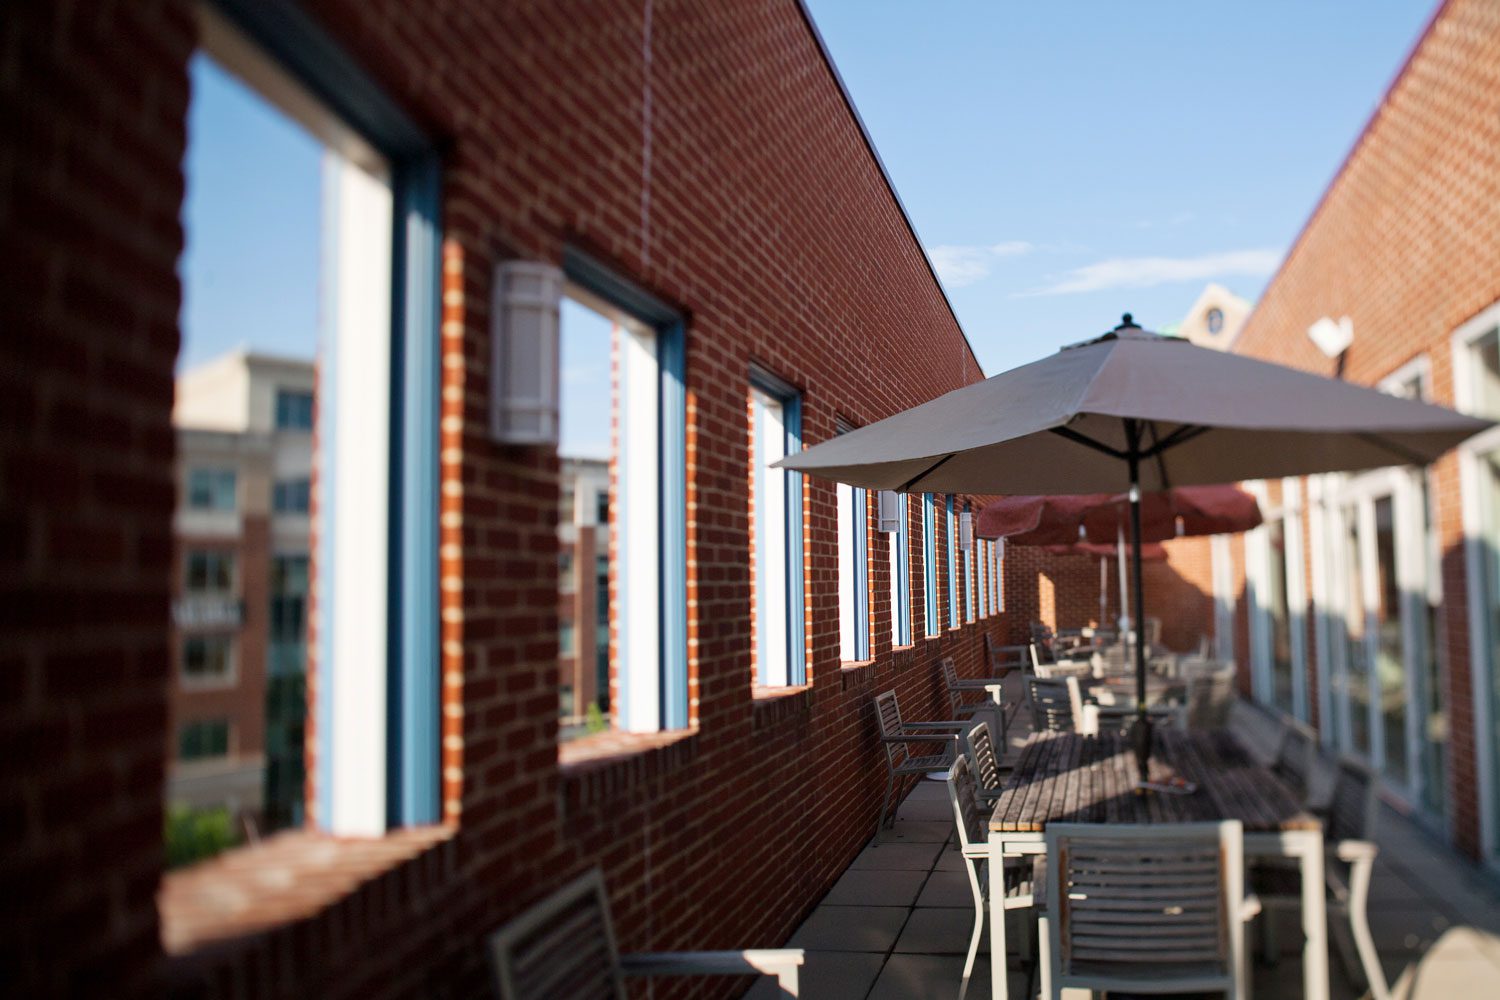 Outdoor patio featuring plenty of seating including tables with awnings